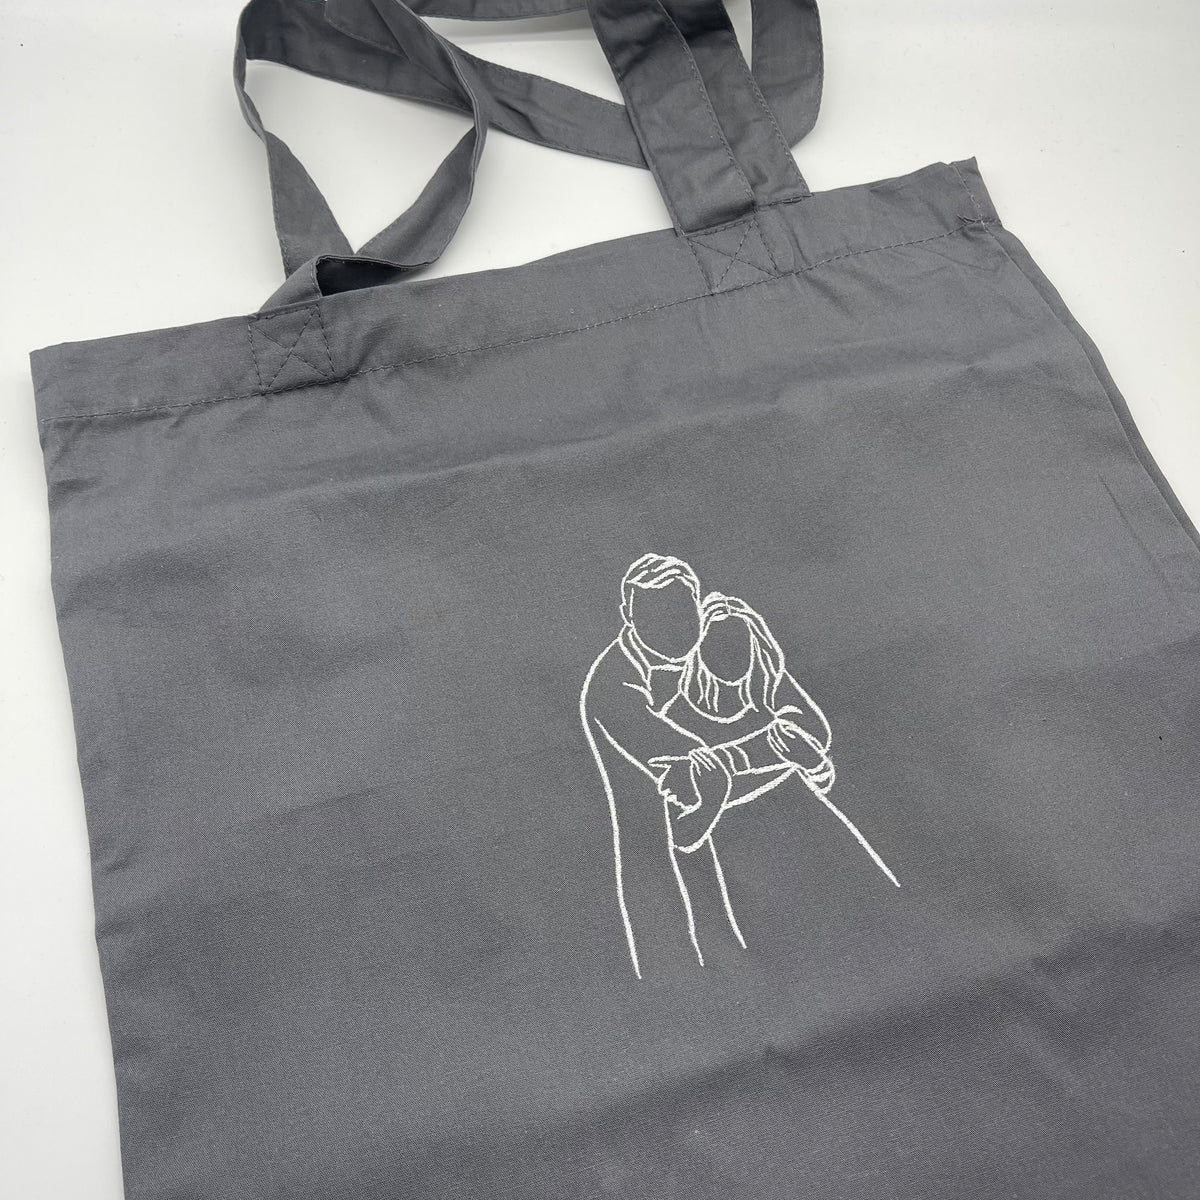 Grey Personalised outline Stitch Tote bag. Create the best personalised beach bag, personalised tote bags even personalised gift bags.